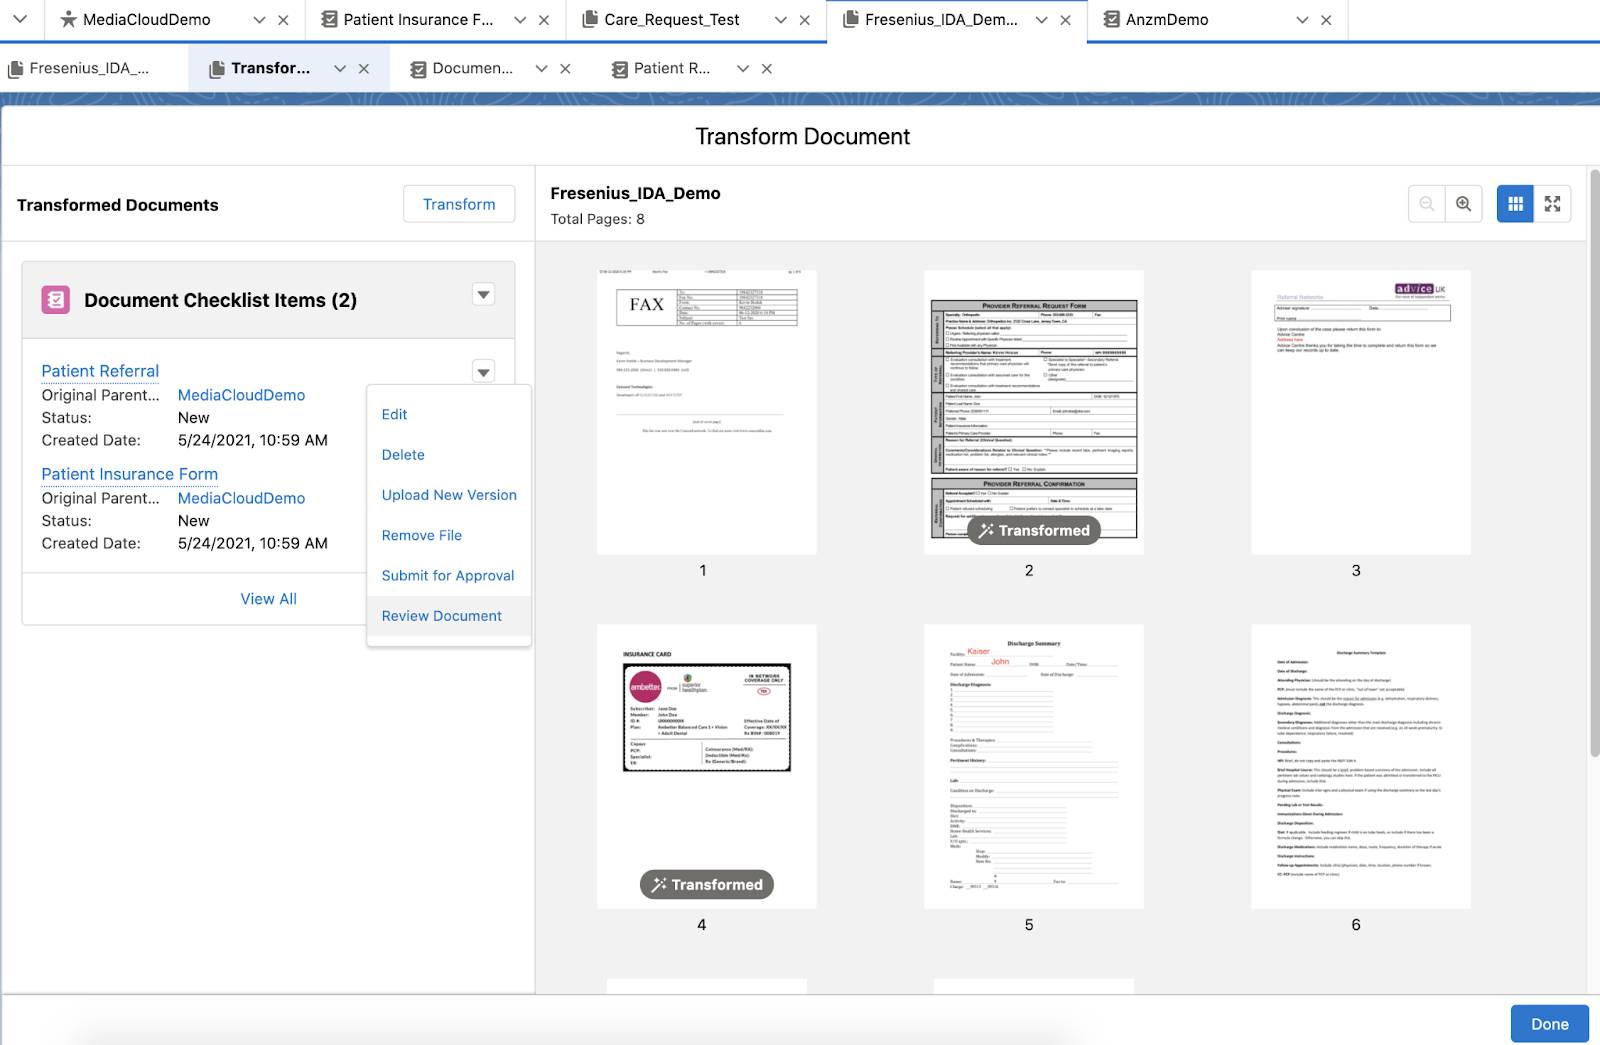 The Transform Document page showing Document Checklist items with Review Document selected.